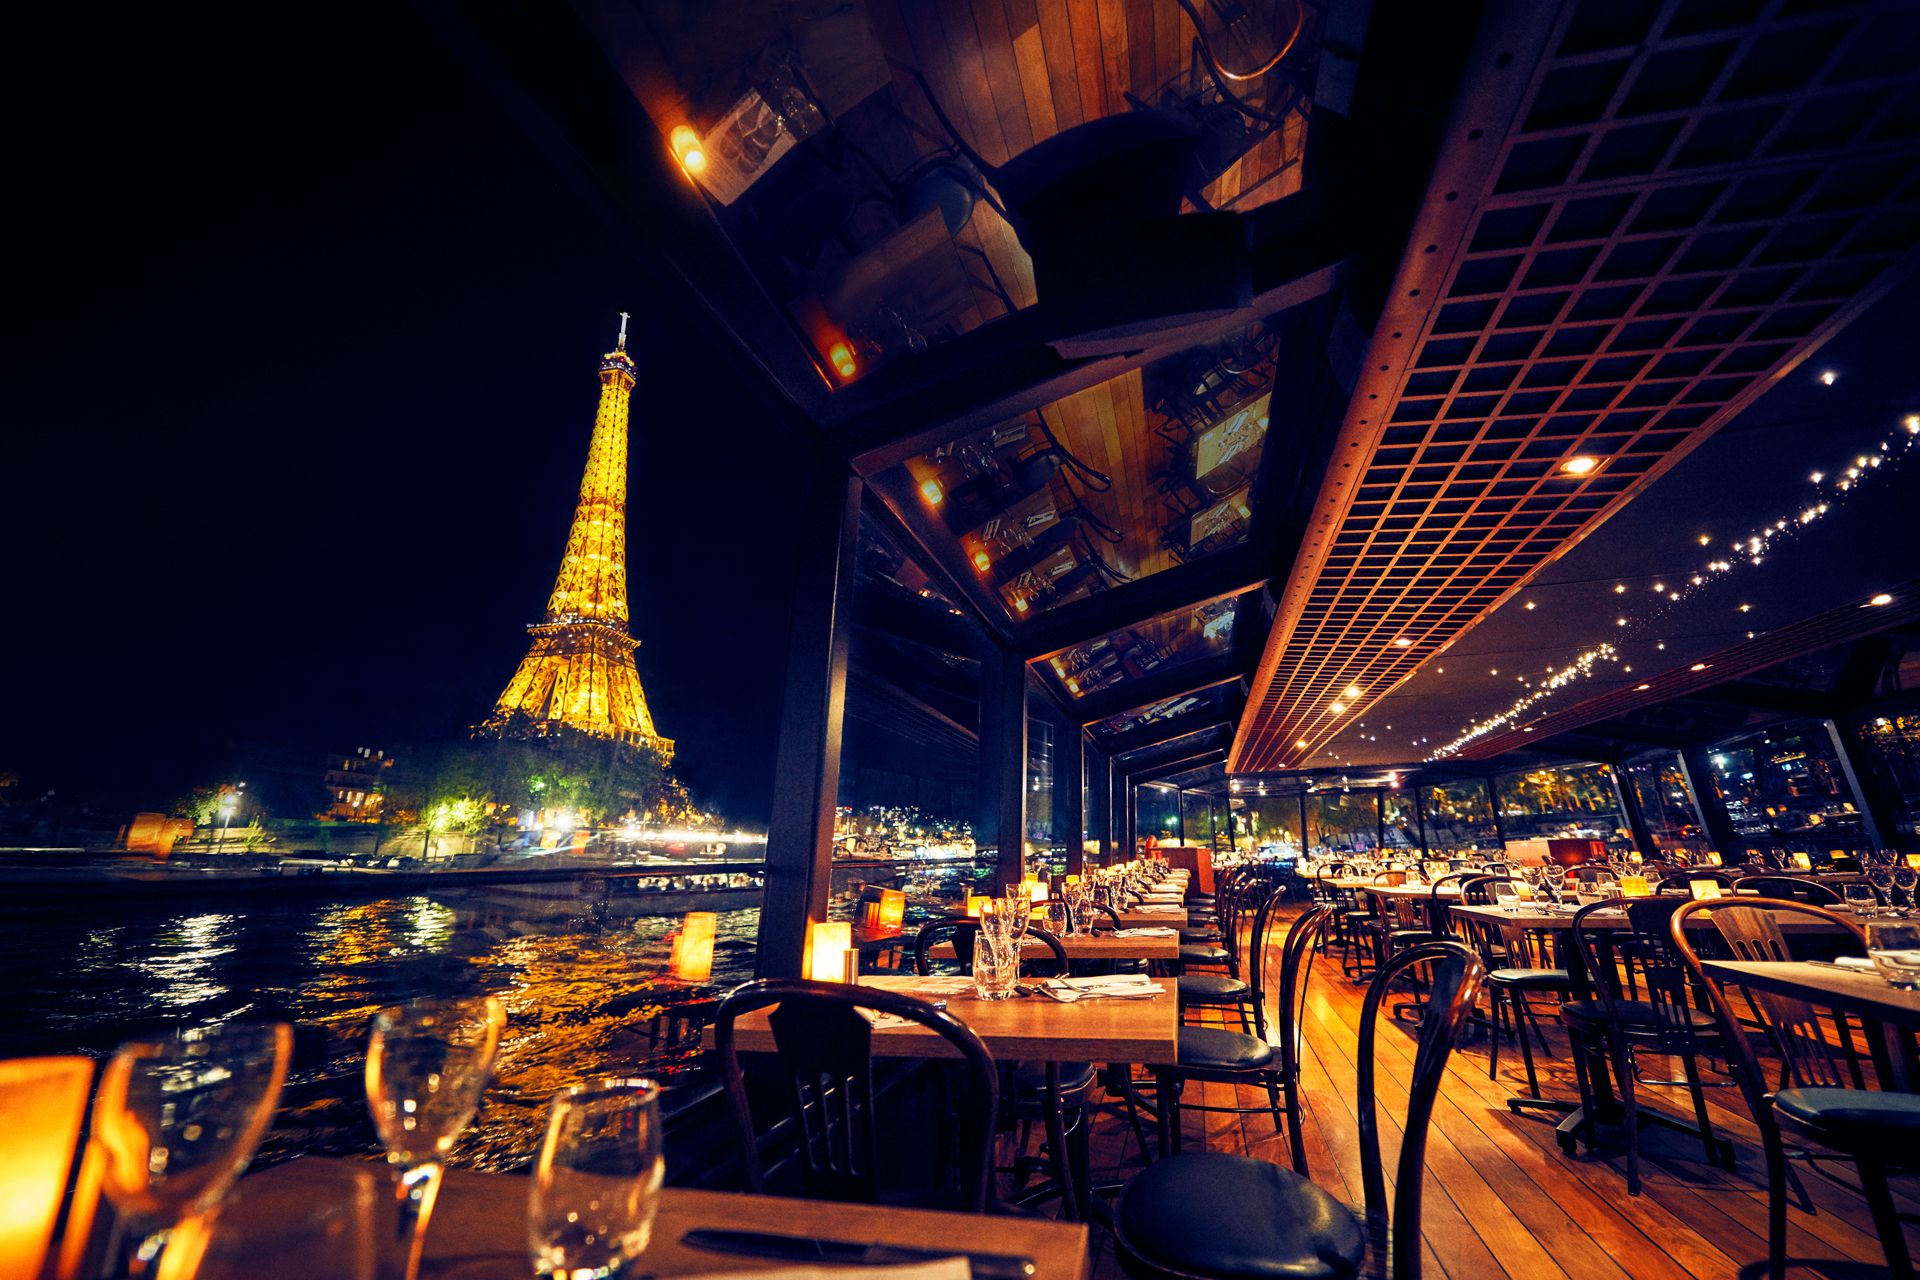 Romantic Seine River Dinner Cruise 6 PM, Table by the window